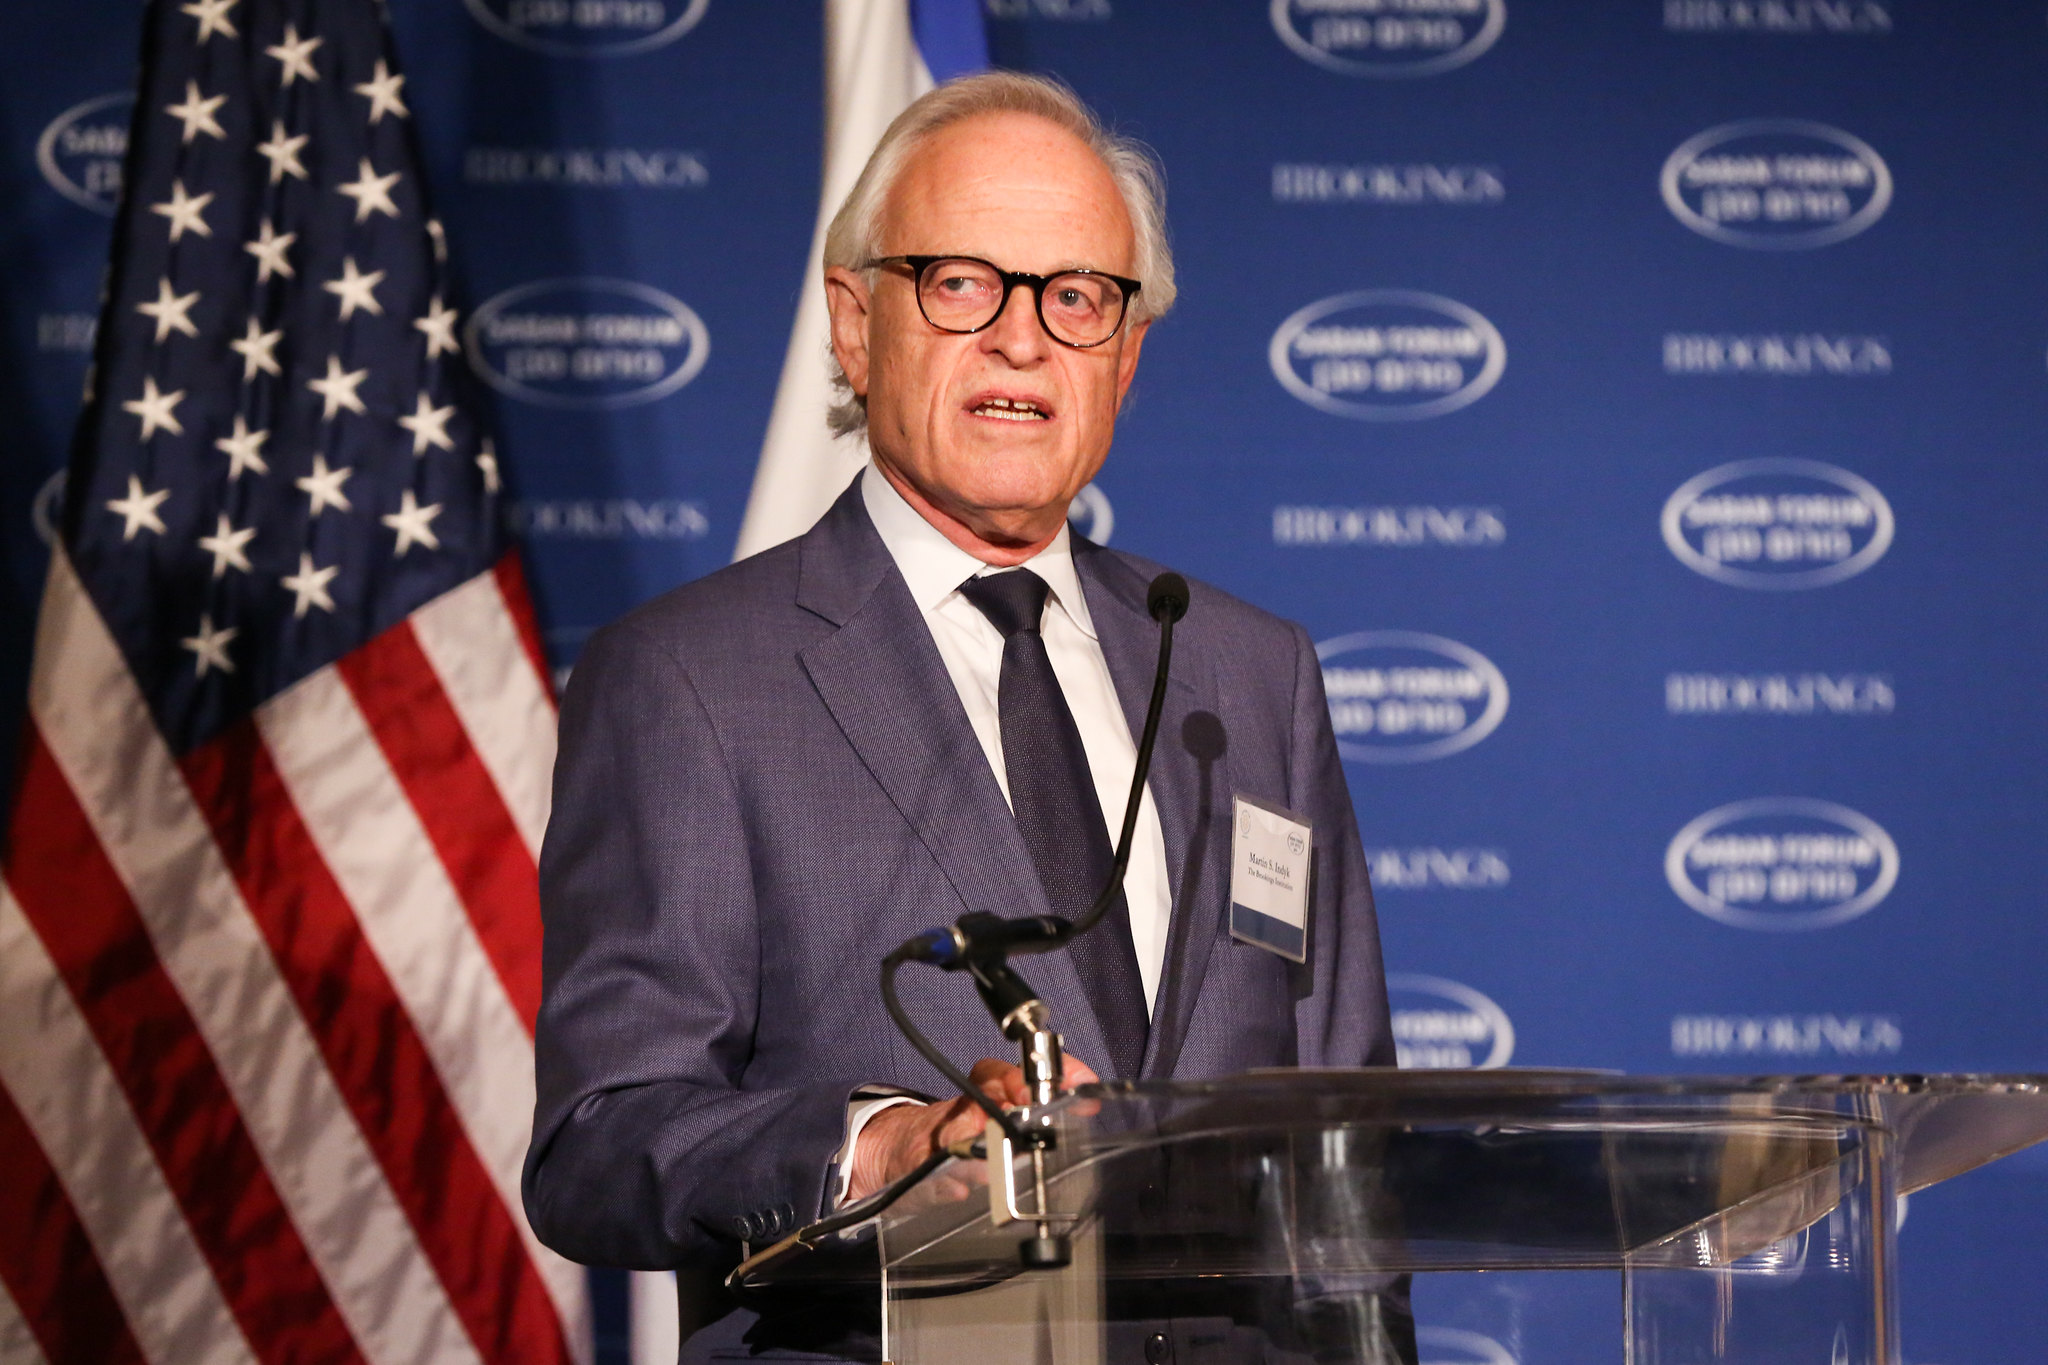 Martin Indyk, then Brookings Executive Vice President, opens the 2015 Saban Forum 'Israel and the United States: Yesterday, today, and tomorrow,' December 5, 2015. (Ralph Alswang/Brookings Institution/CC BY-NC-ND 2.0)